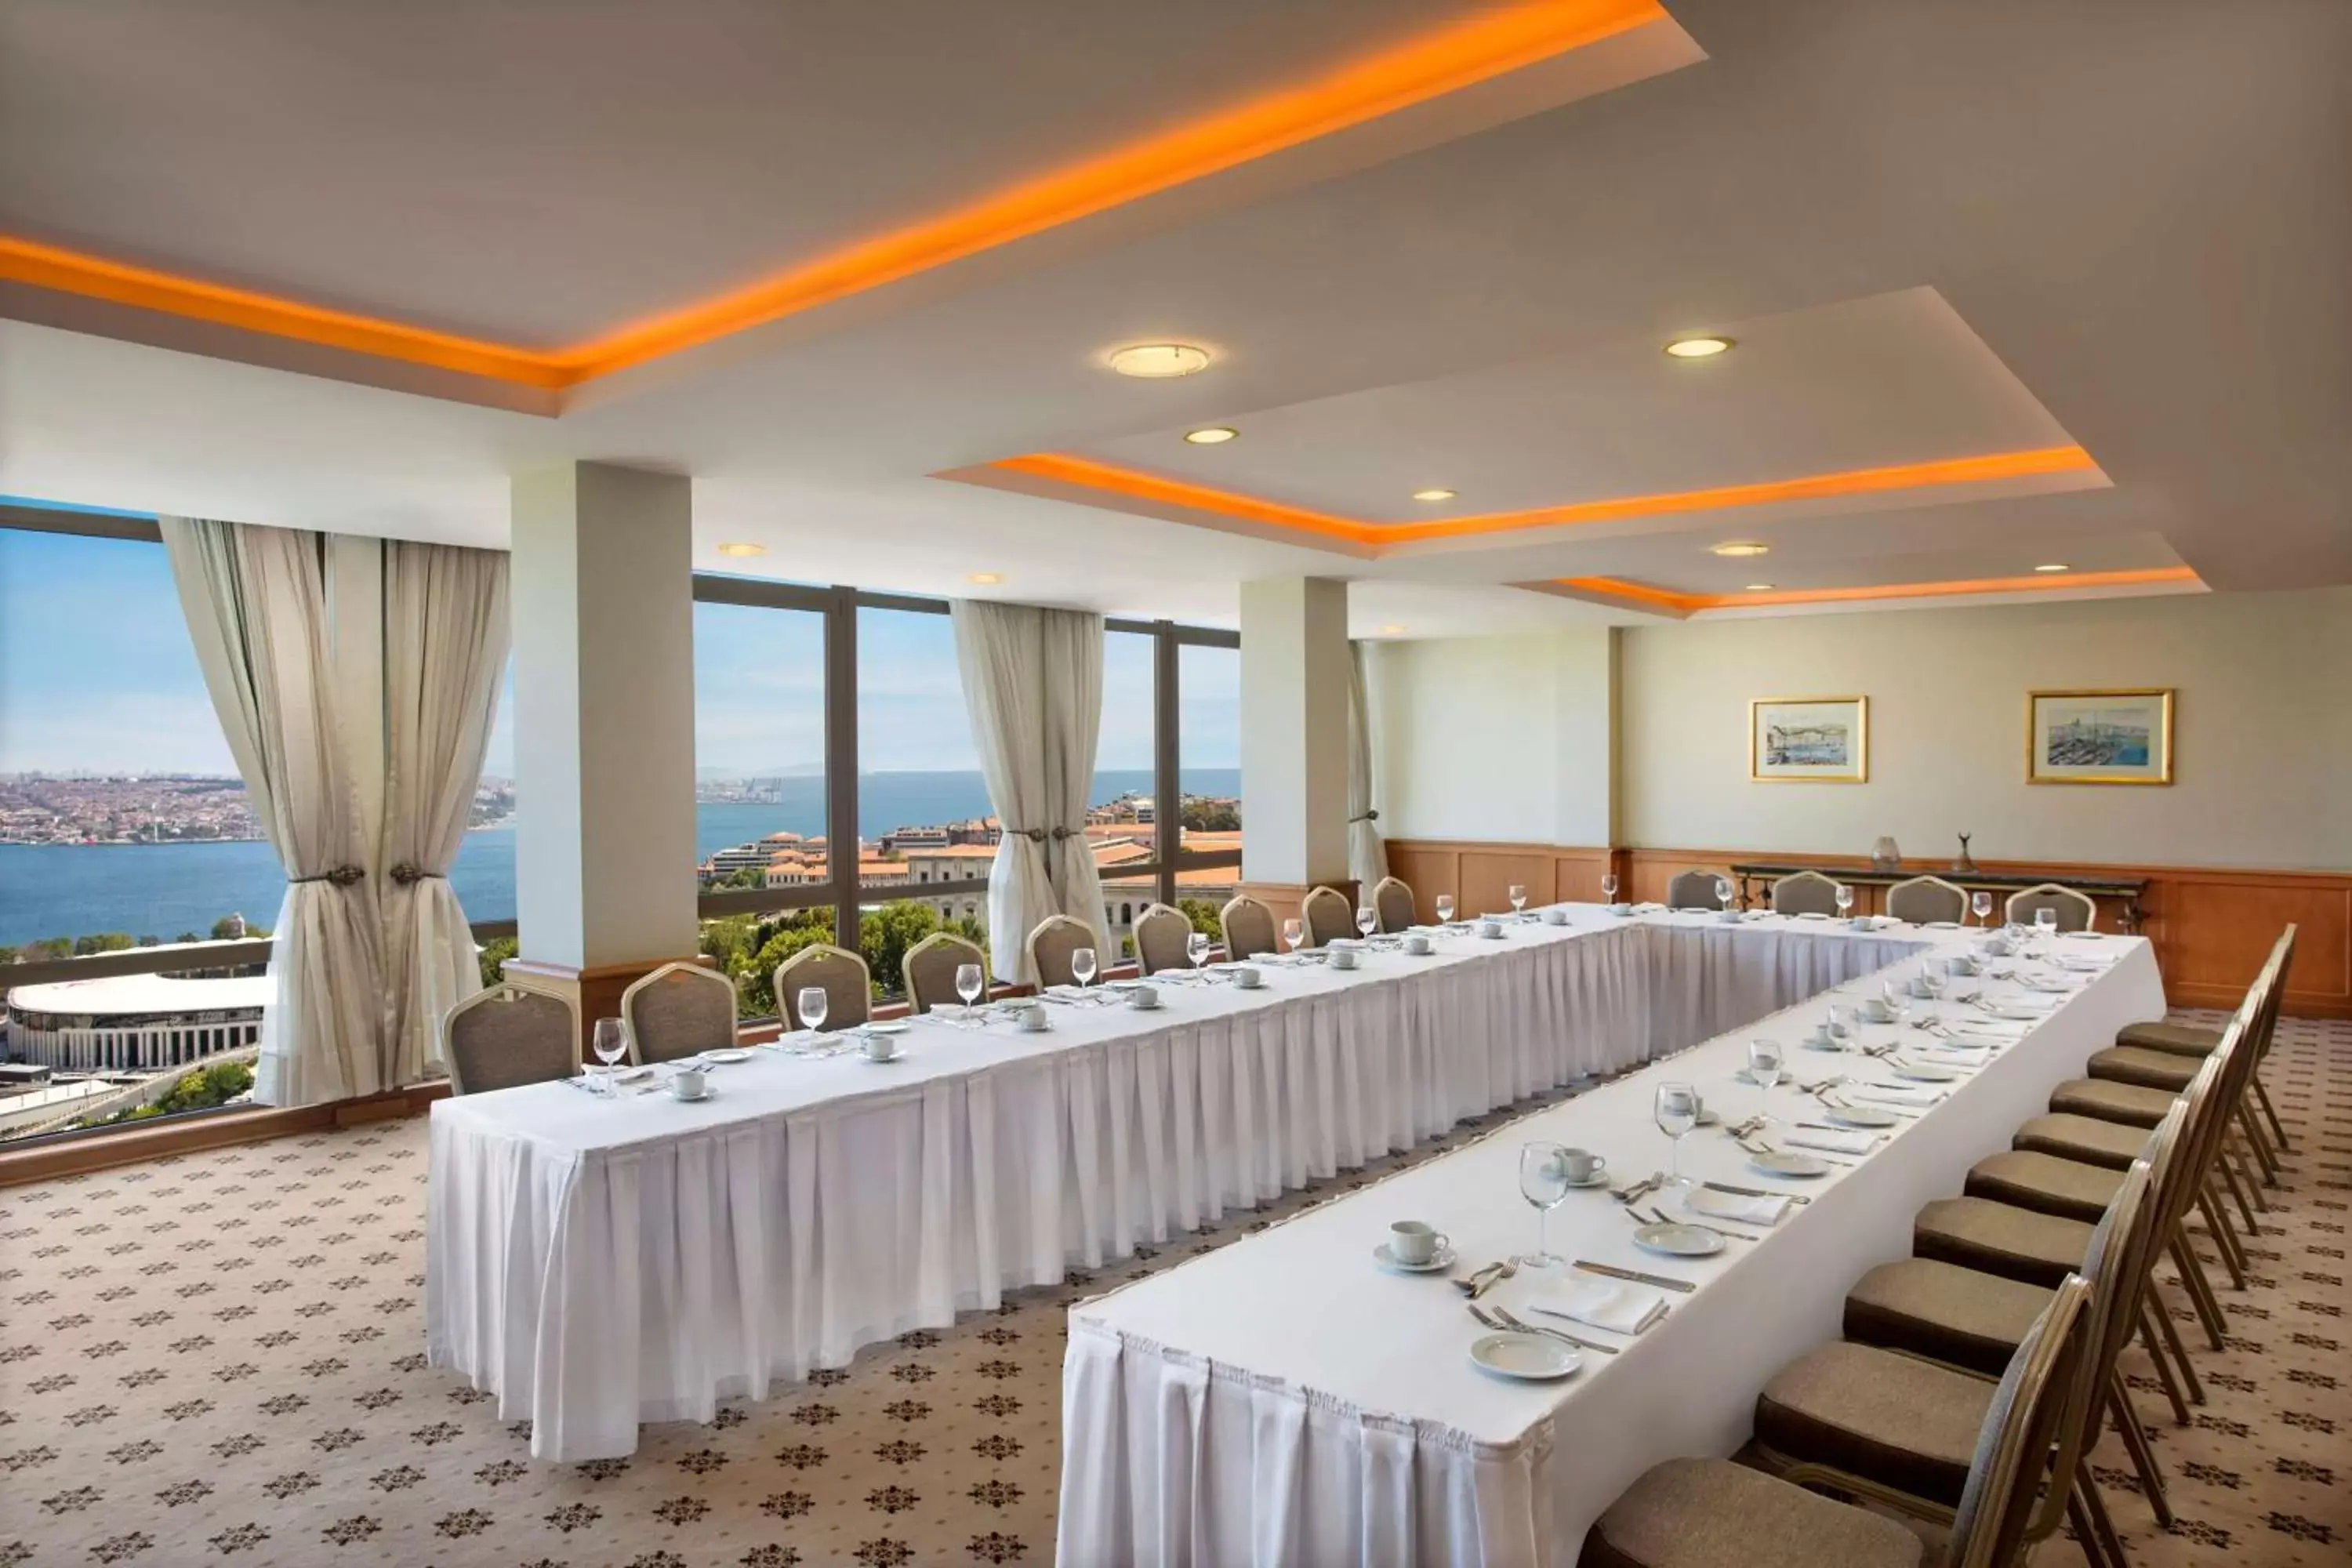 Meeting/conference room in Hilton Istanbul Bosphorus